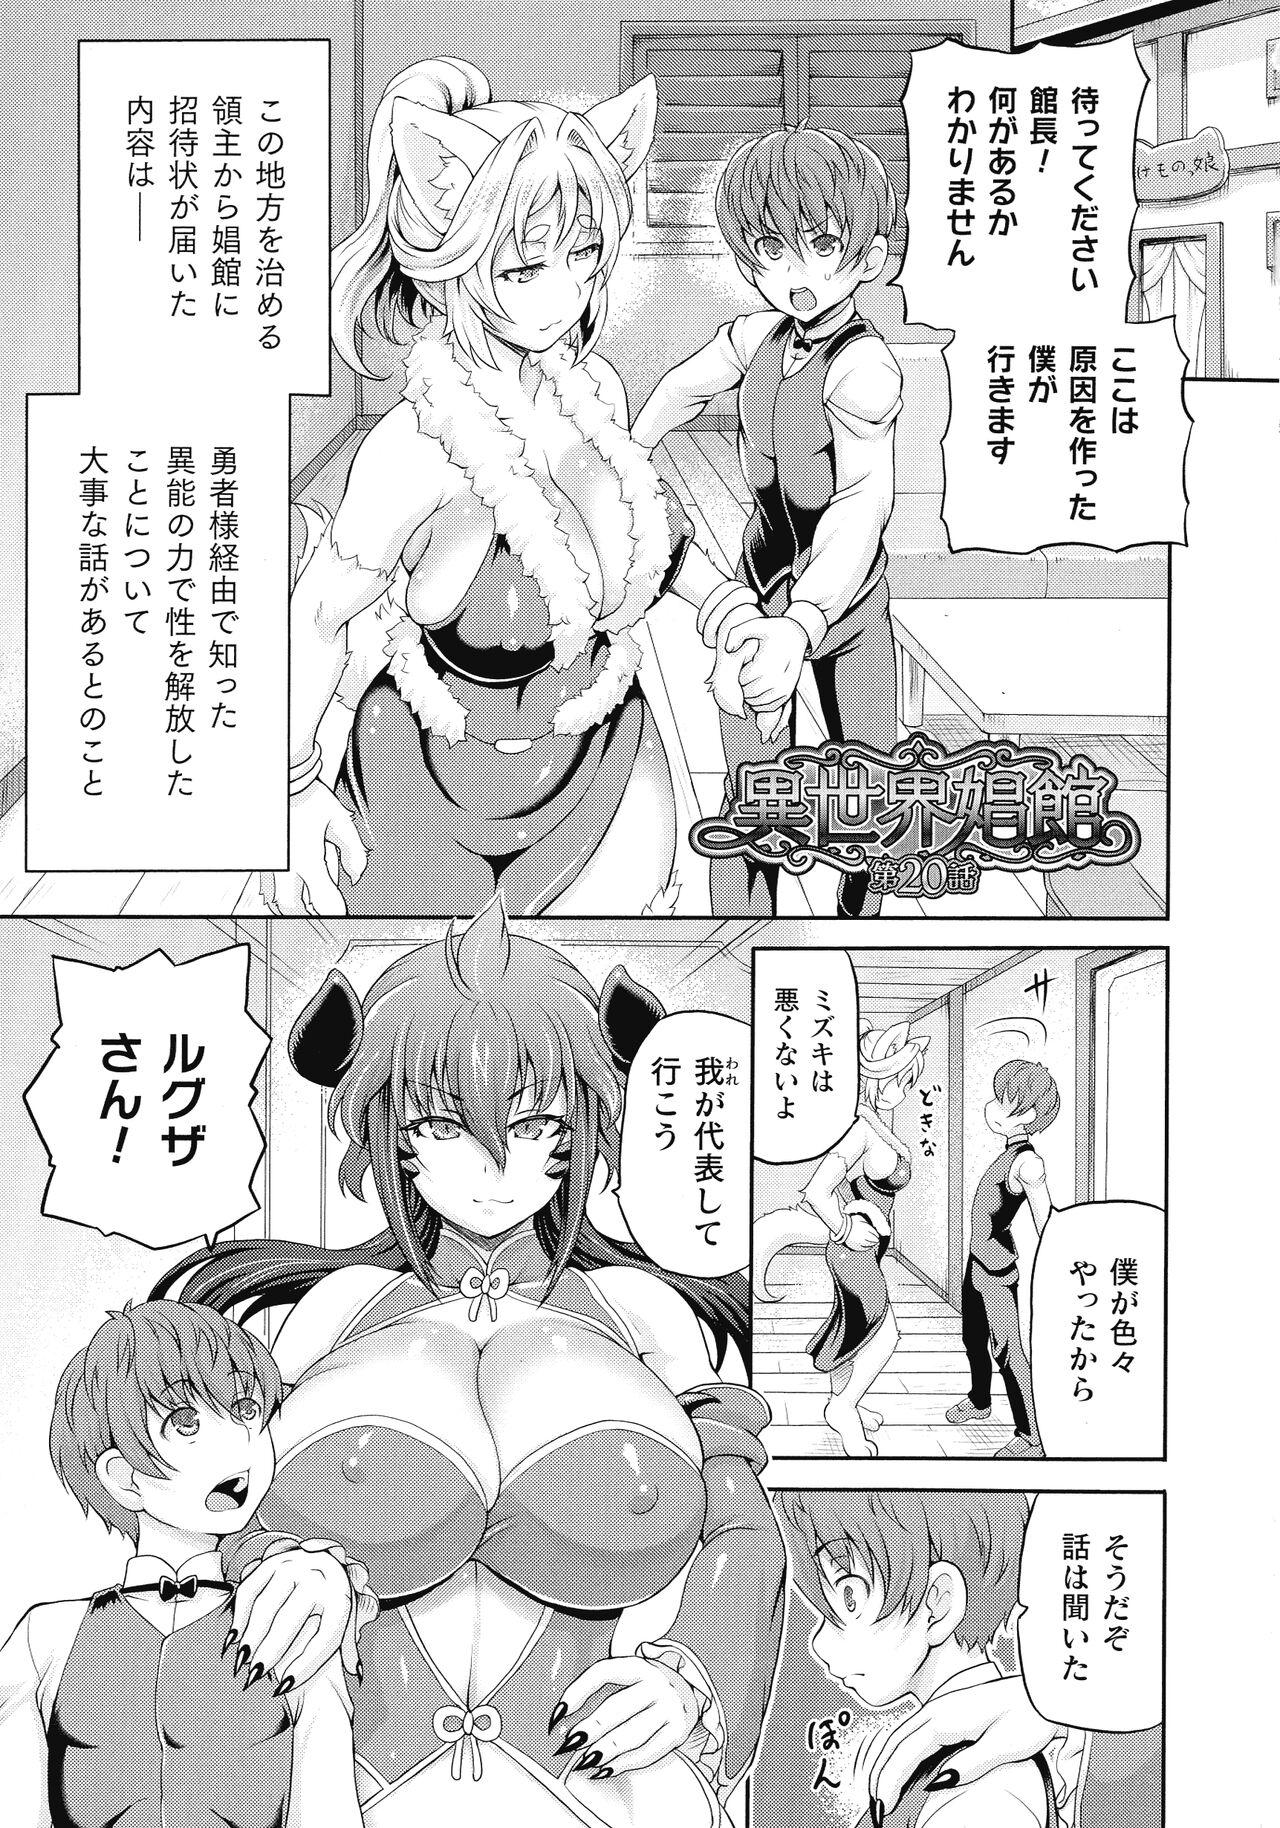 Isekai Shoukan 3 - Brothel in Another World 98